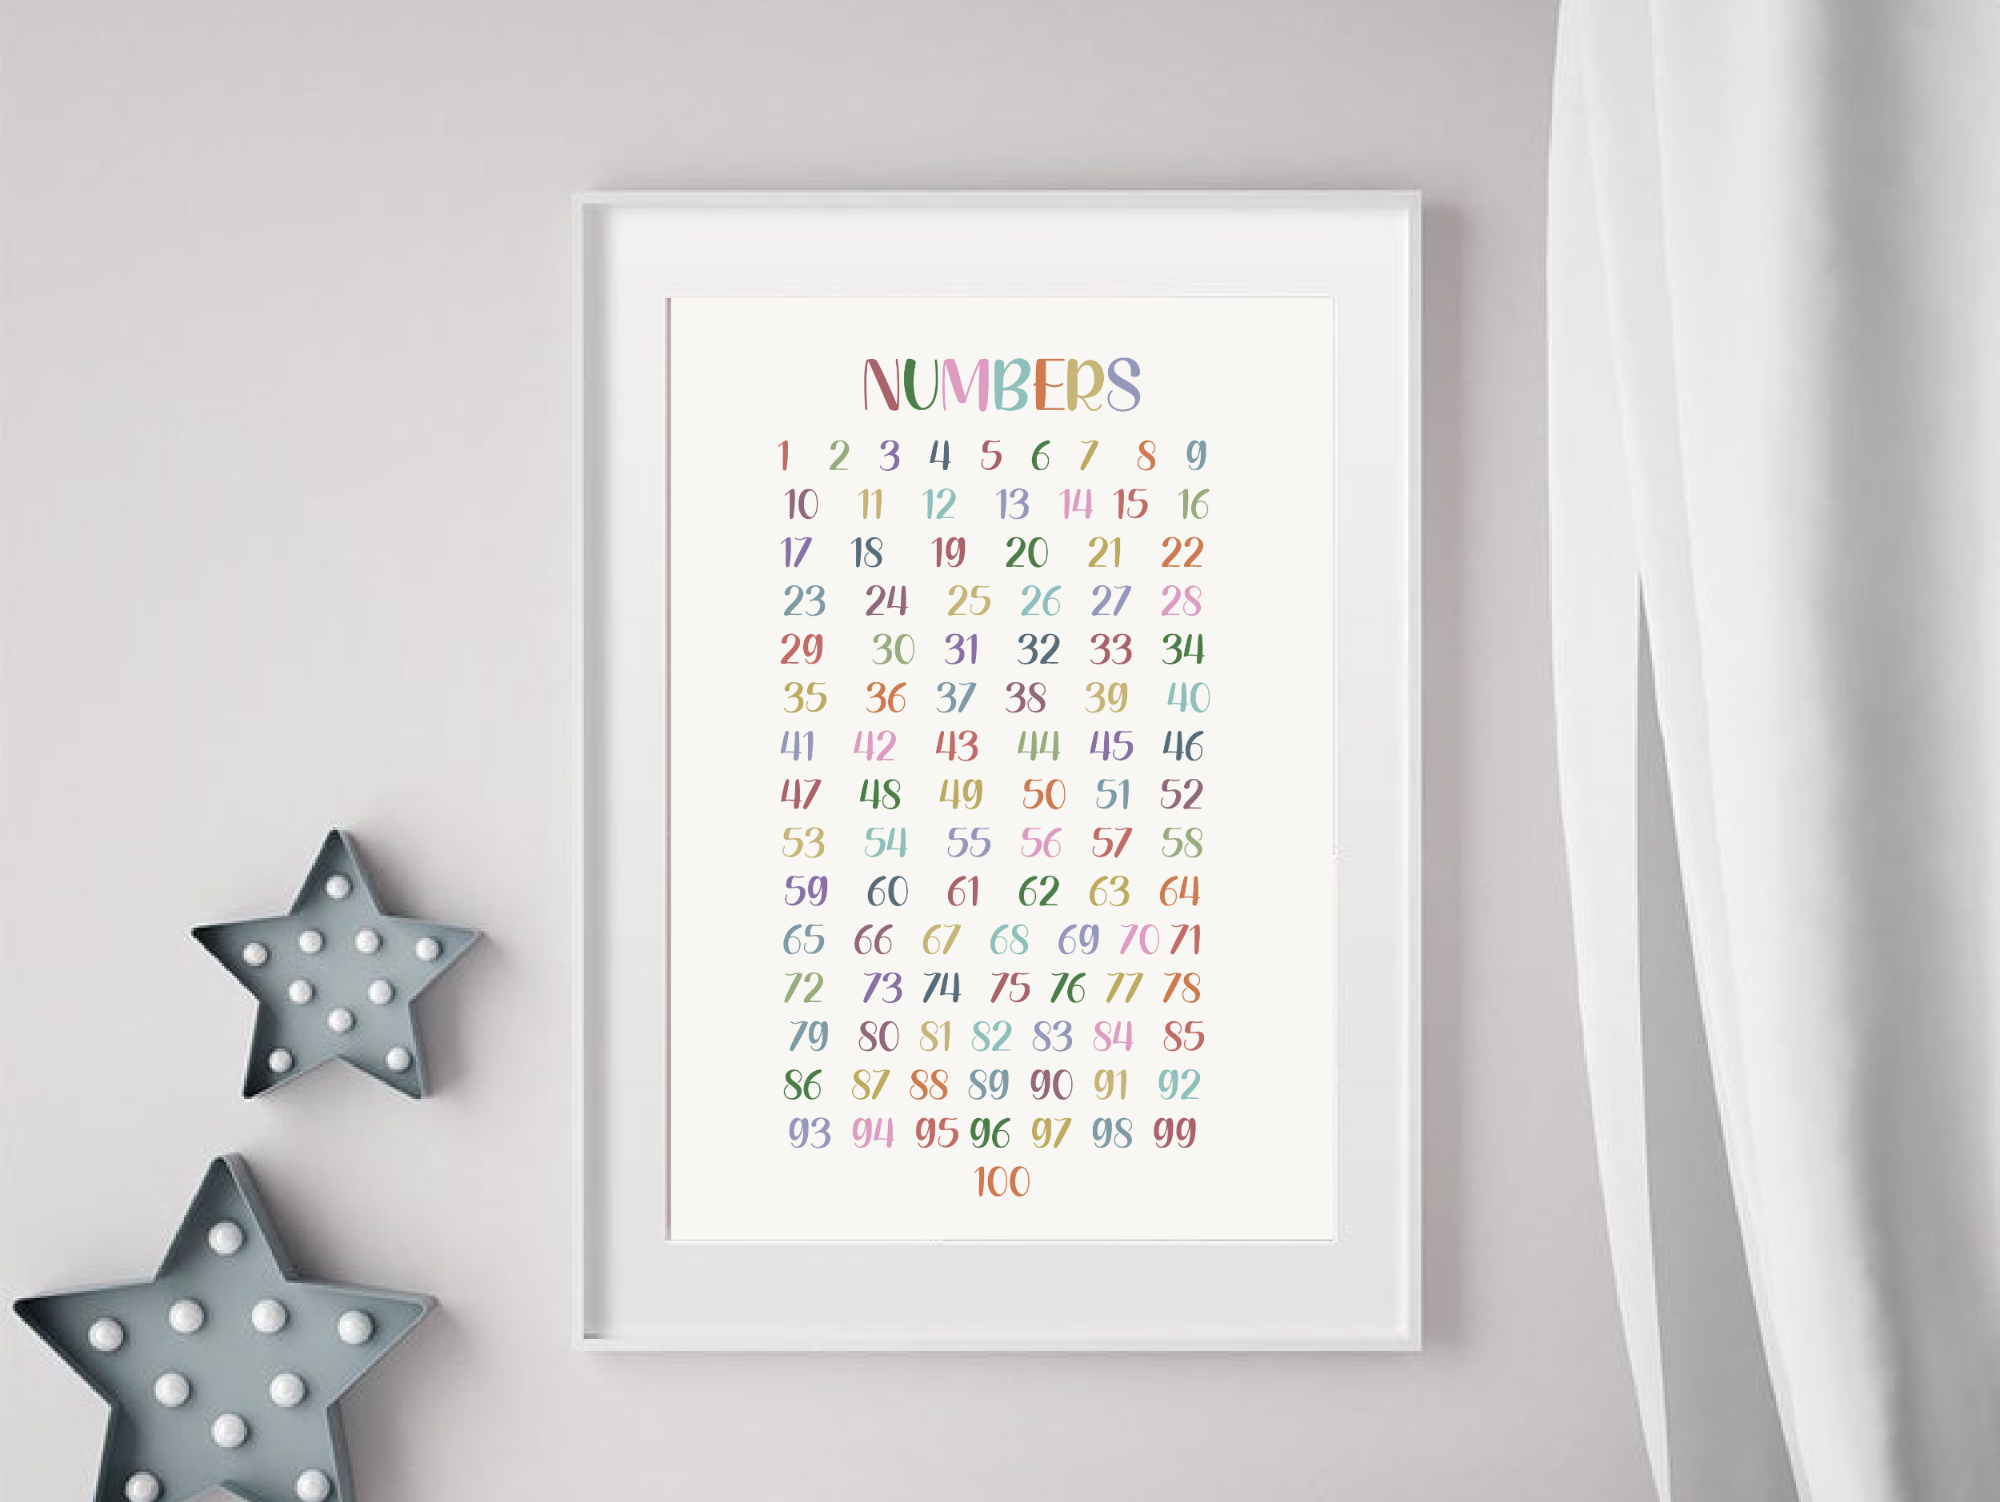 Numbers 1 to 100 Art, Numbers Poster, Number Print, PRINTABLE Wall Art, Educational Wall Art